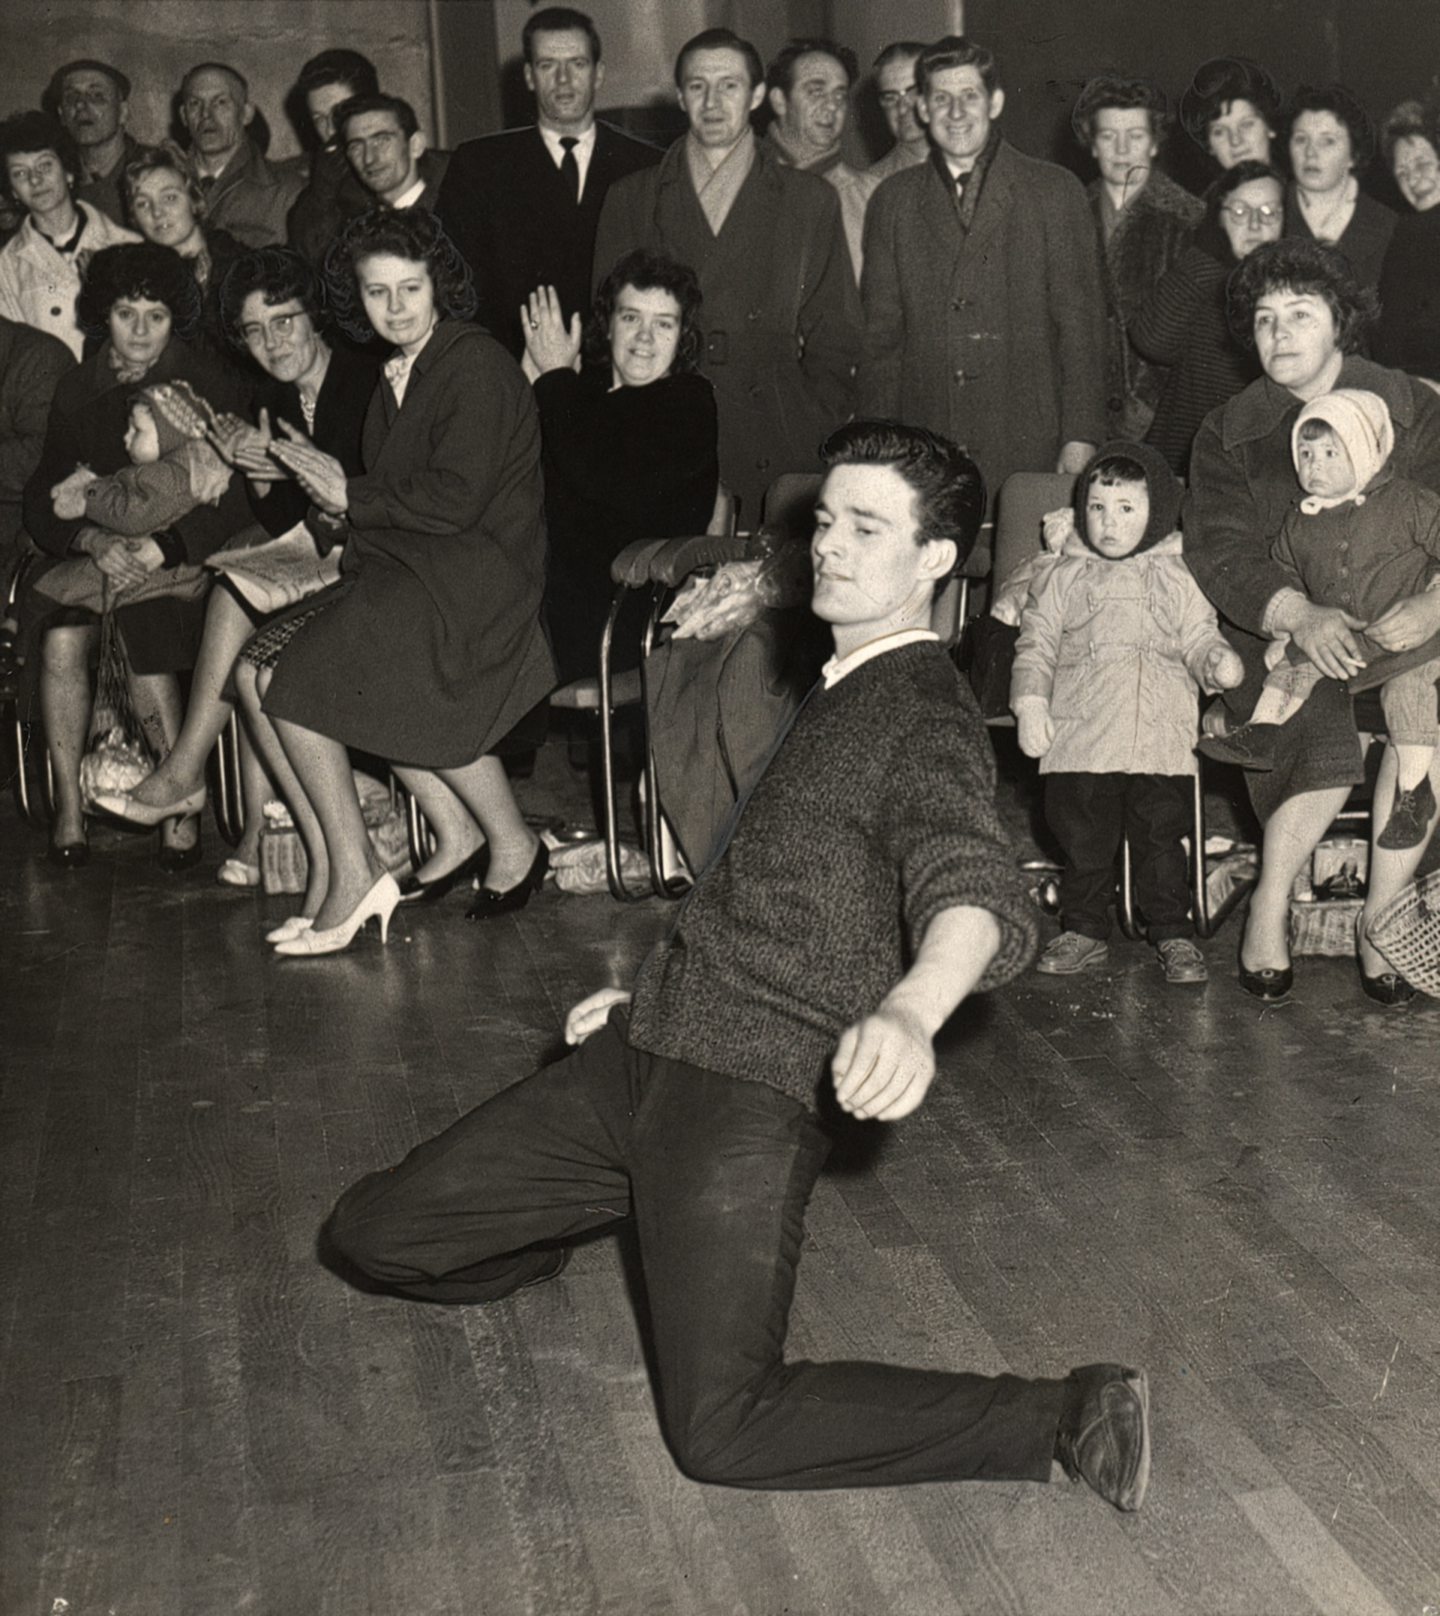 Bobby Cannon puts on the style at the JM Ballroom back in 1962.